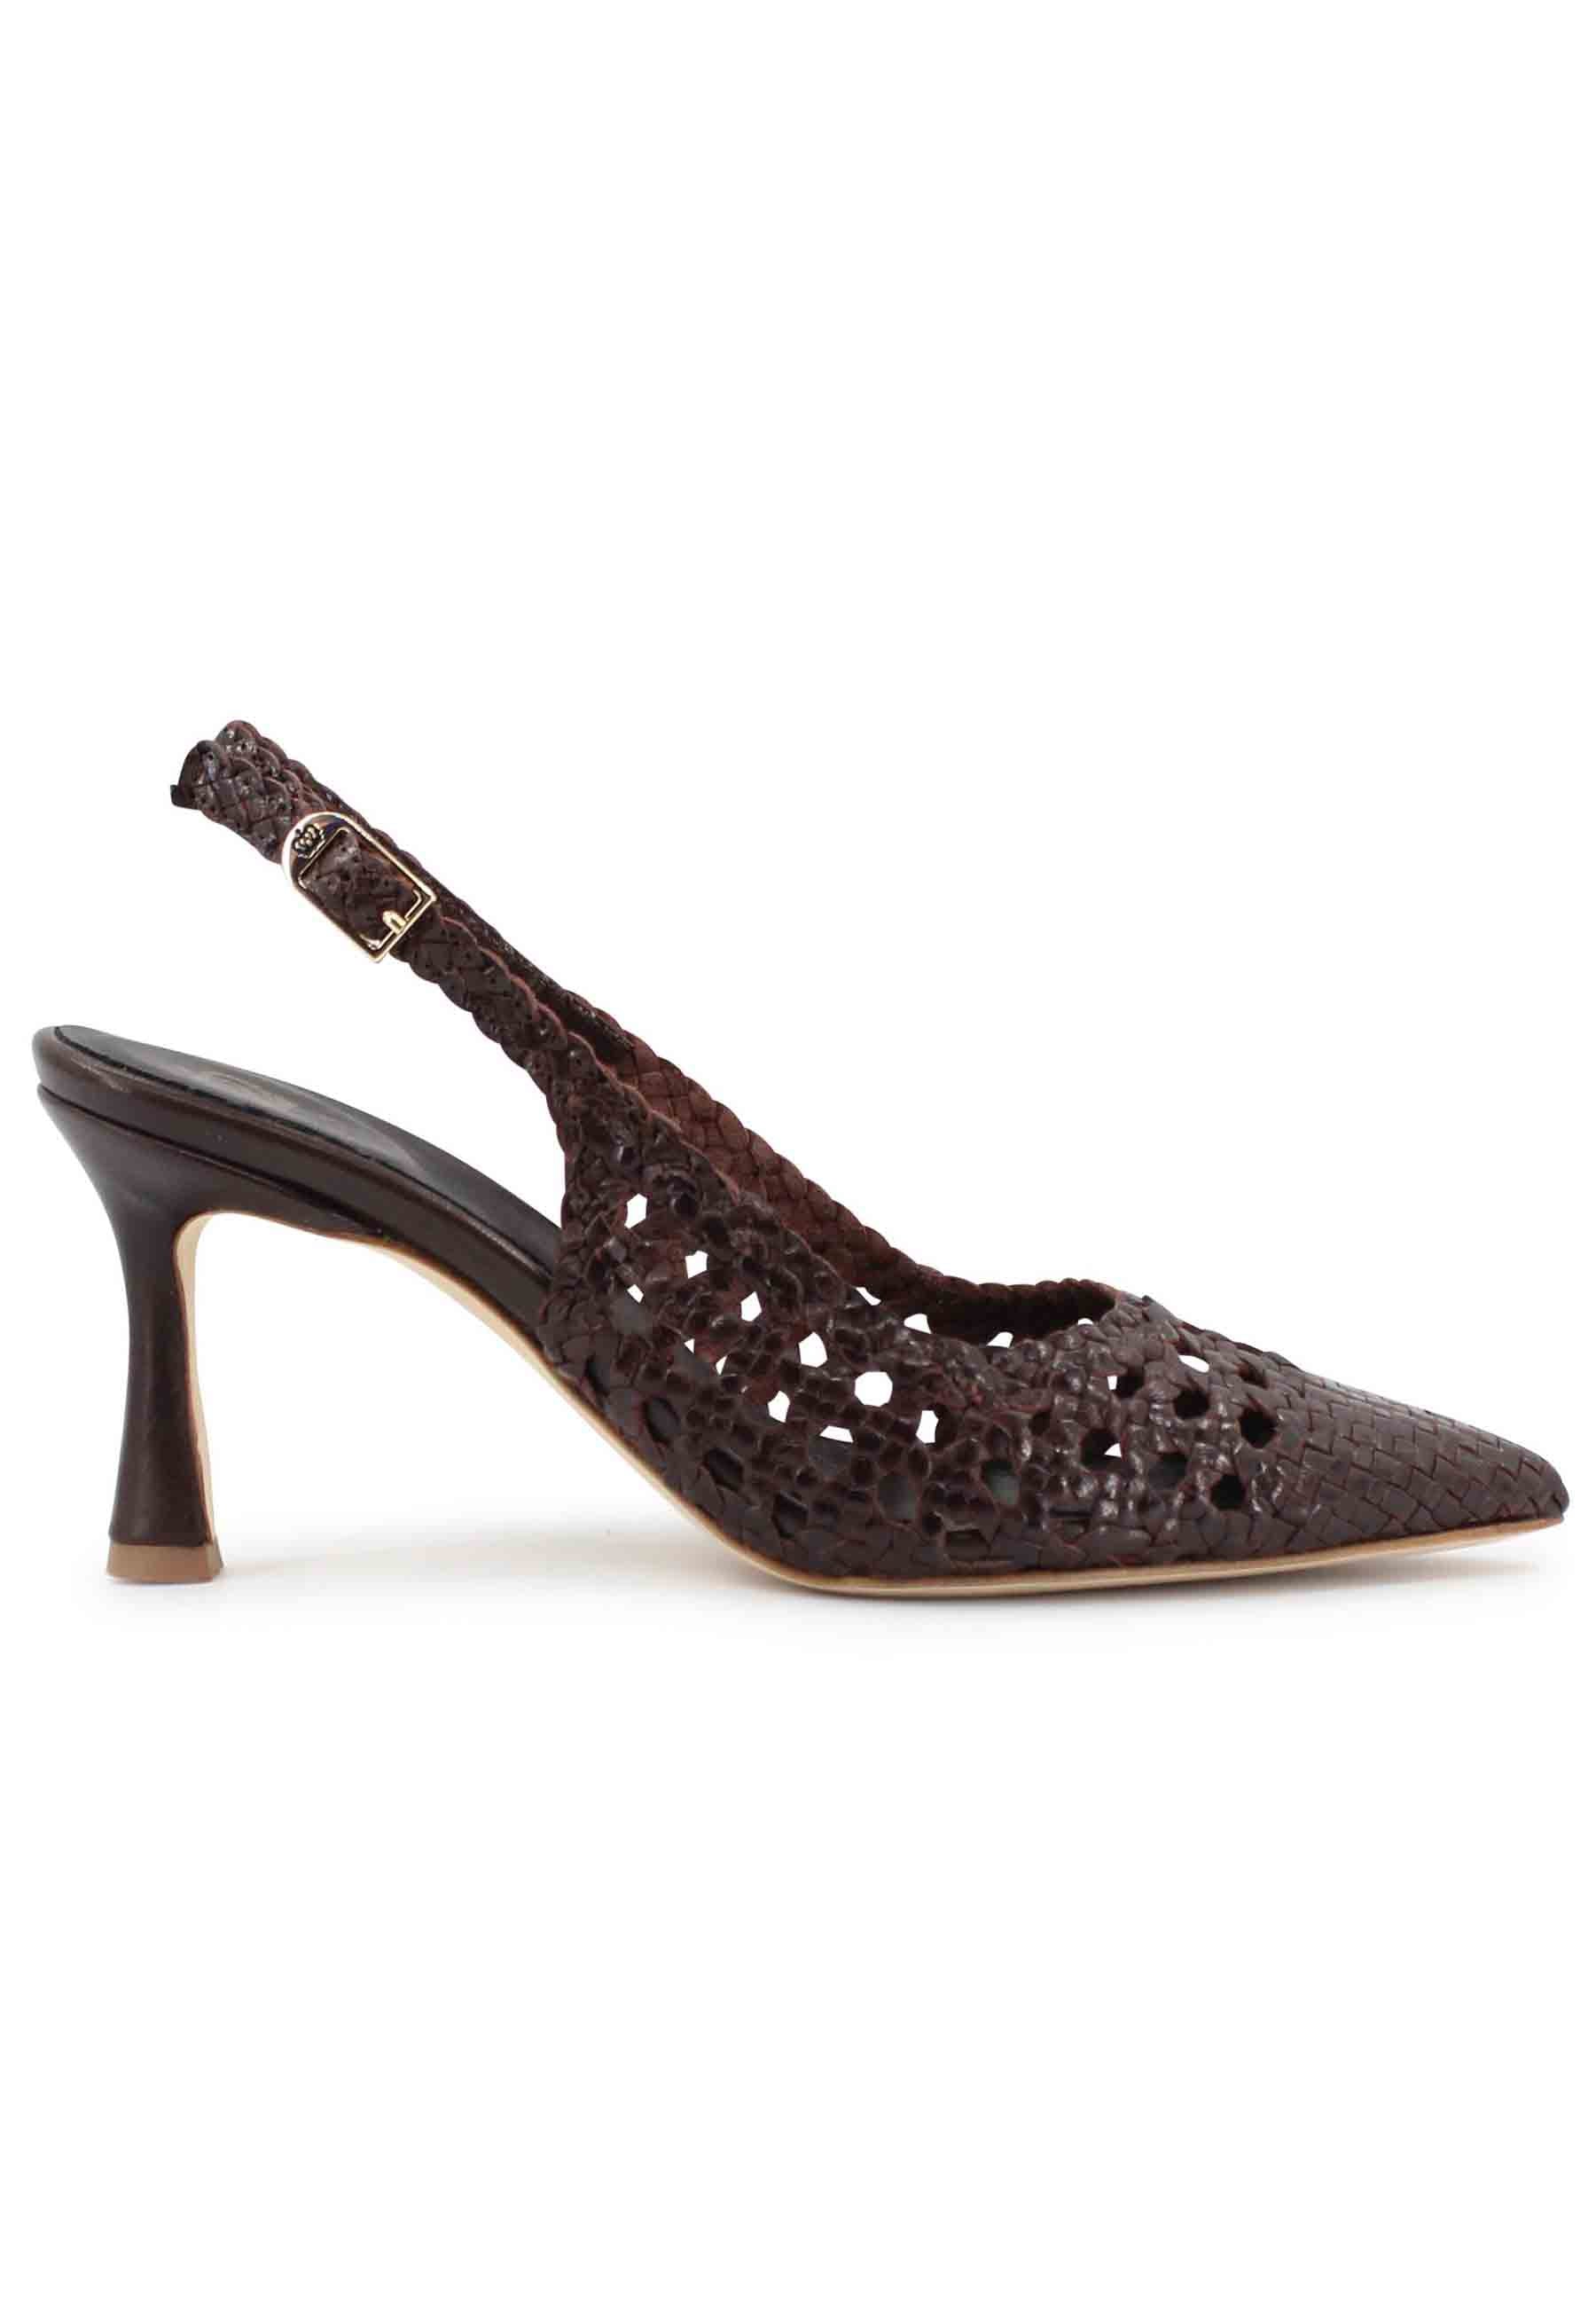 Slingback decollete in brown woven leather with high heel